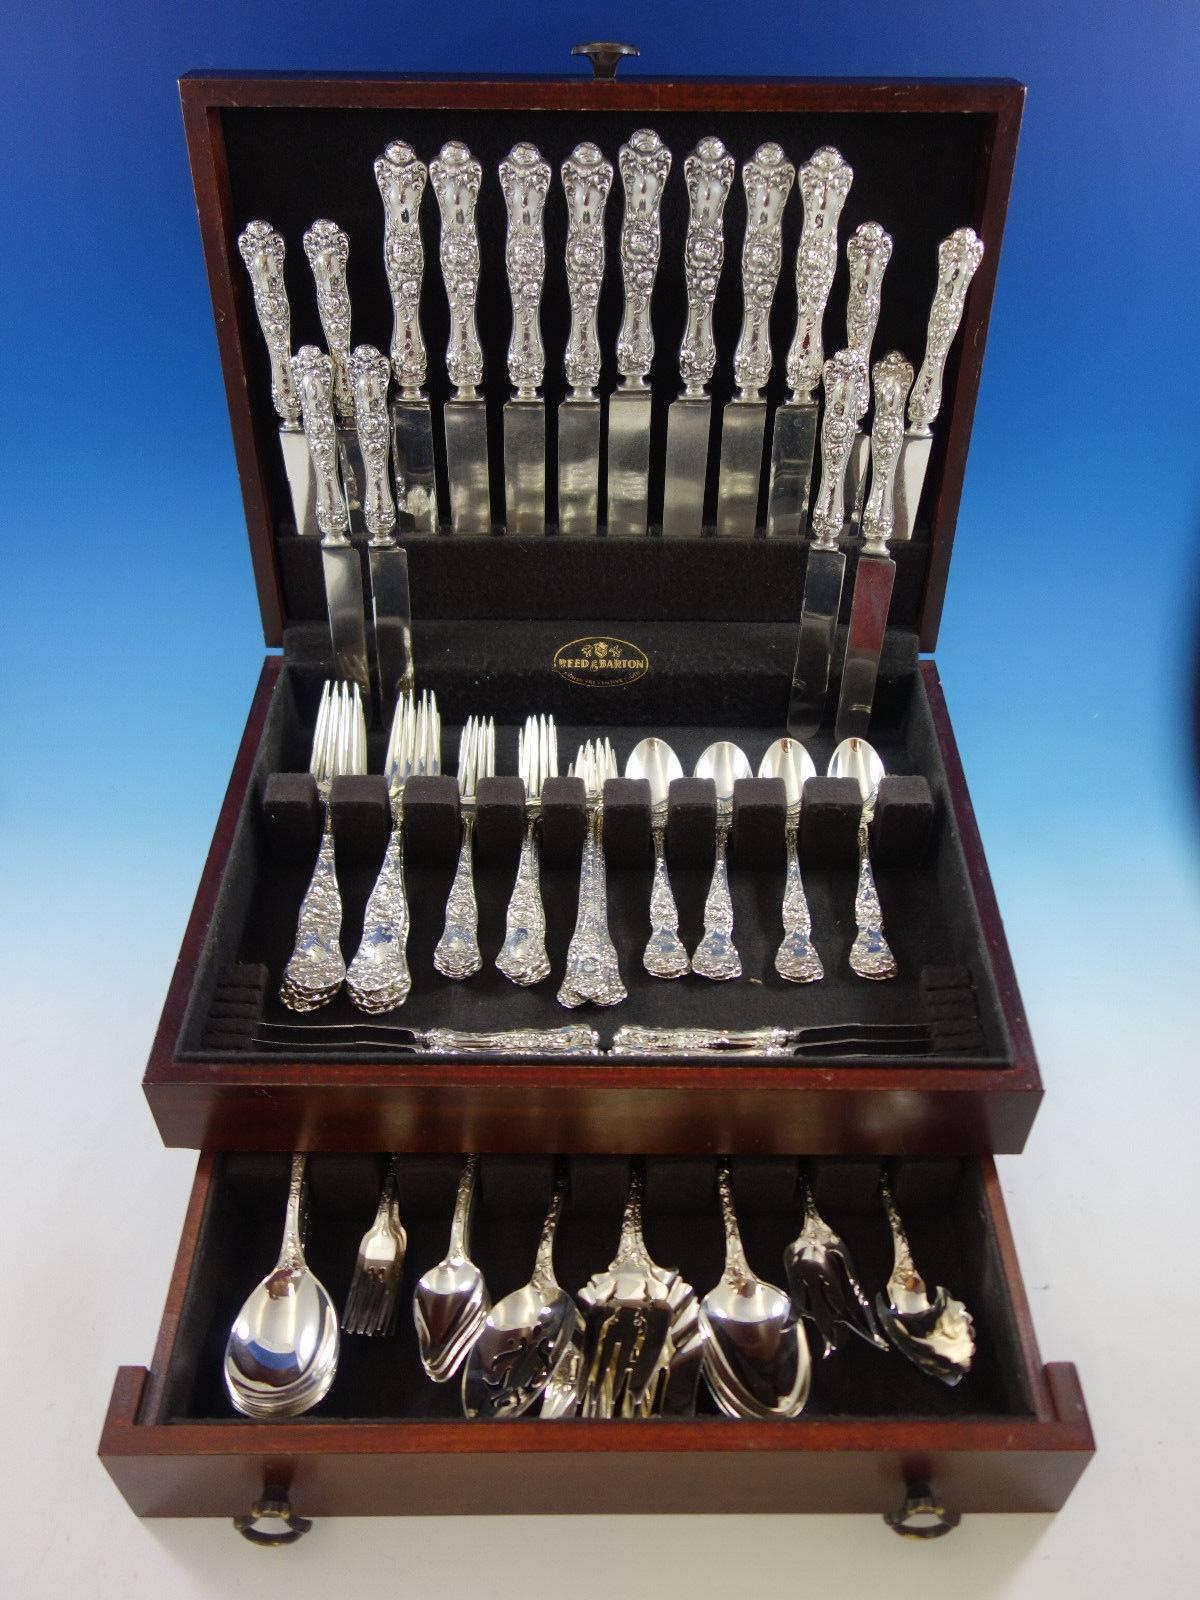 American beauty by Shiebler/Mauser sterling silver flatware set with rose motif - 90 pieces. This set includes: 

eight dinner size knives, 10 1/8